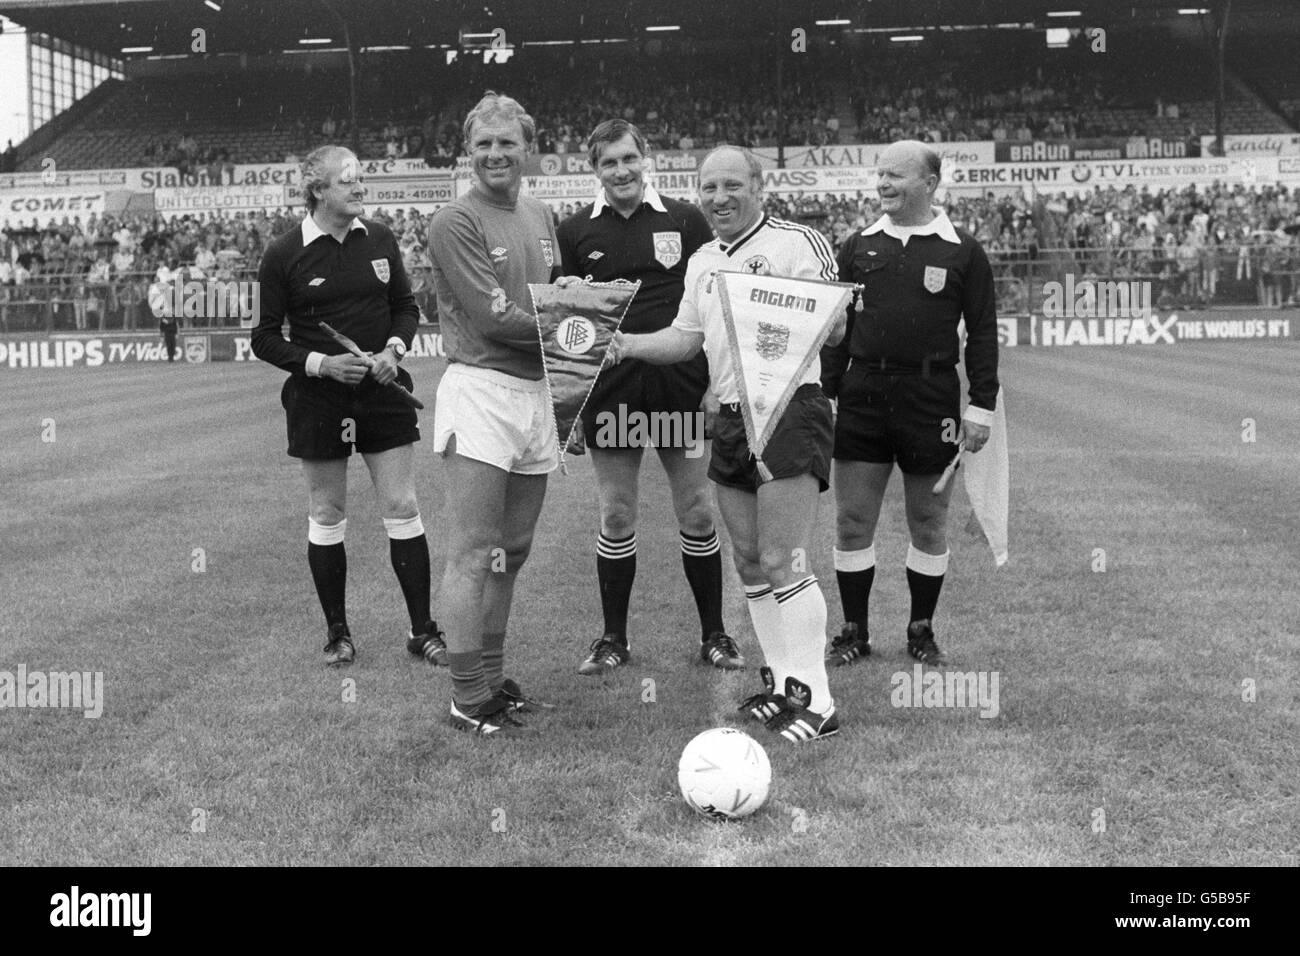 Soccer - Charity Replay of the 1966 World Cup Final - England v West Germany - Elland Road, Leeds Stock Photo